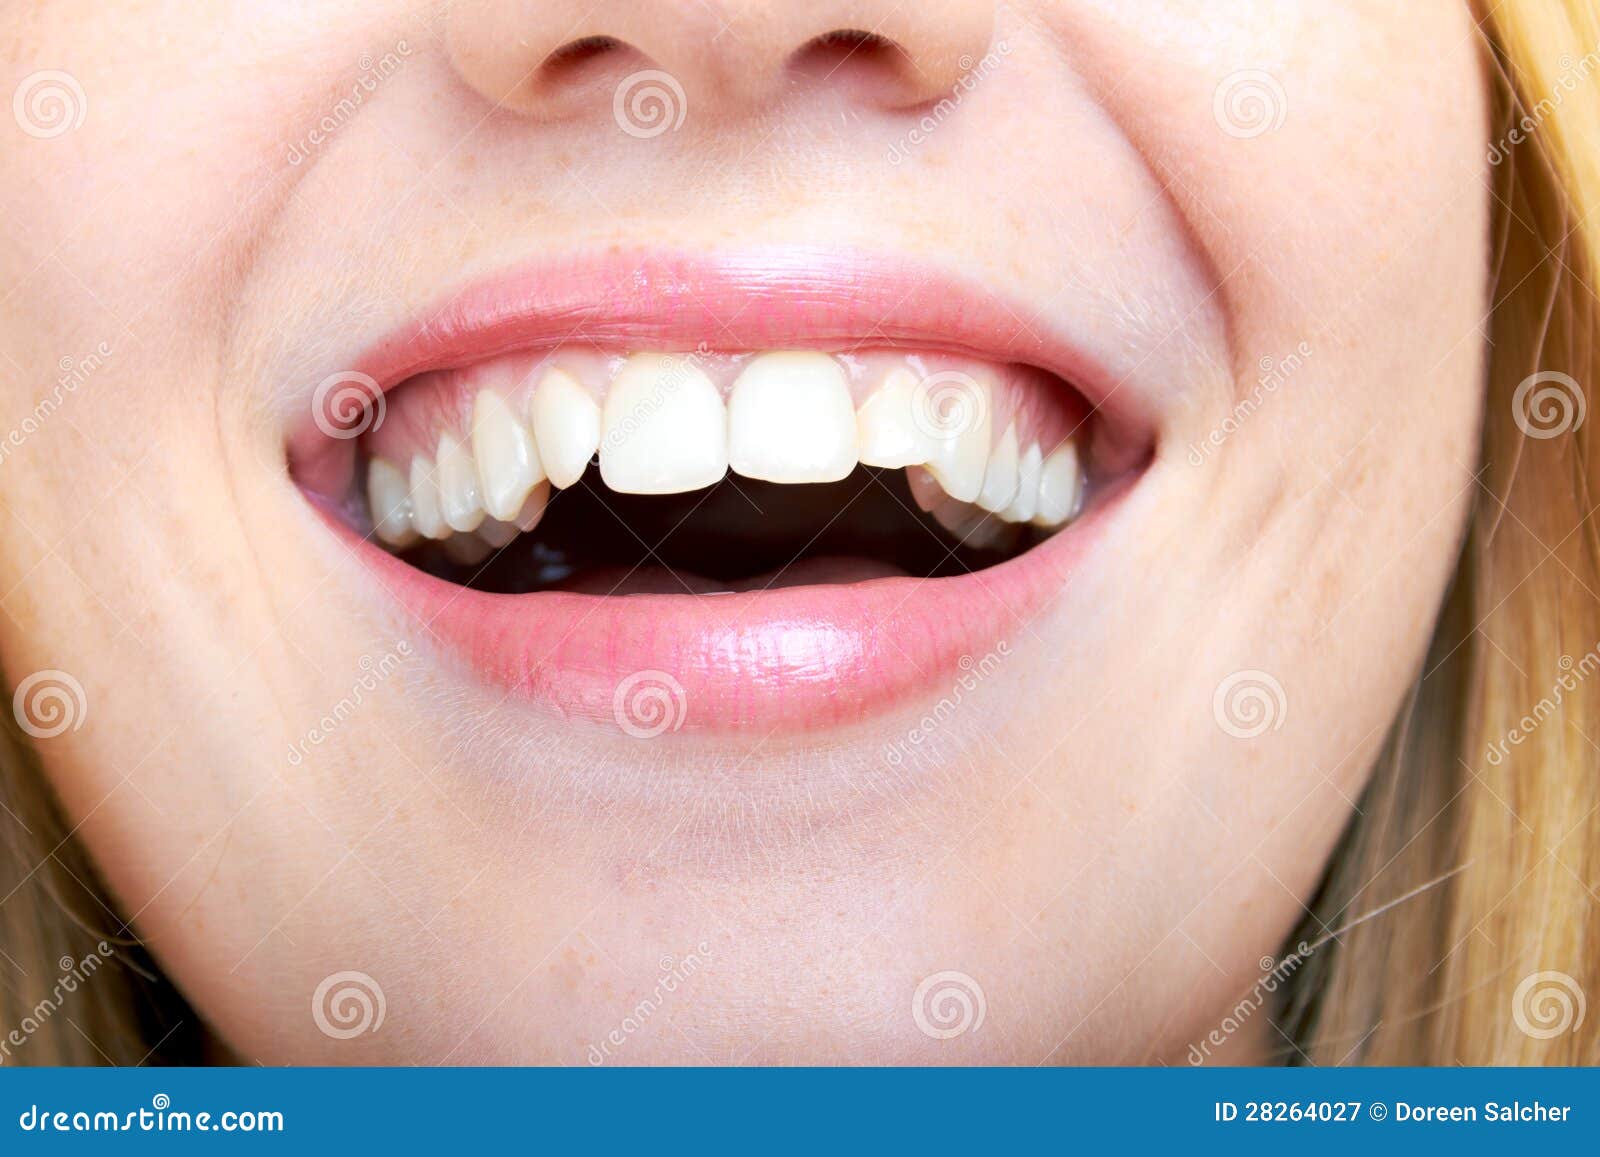 Beautiful Laughing Mouth Of A Woman Royalty Free Stock Photography